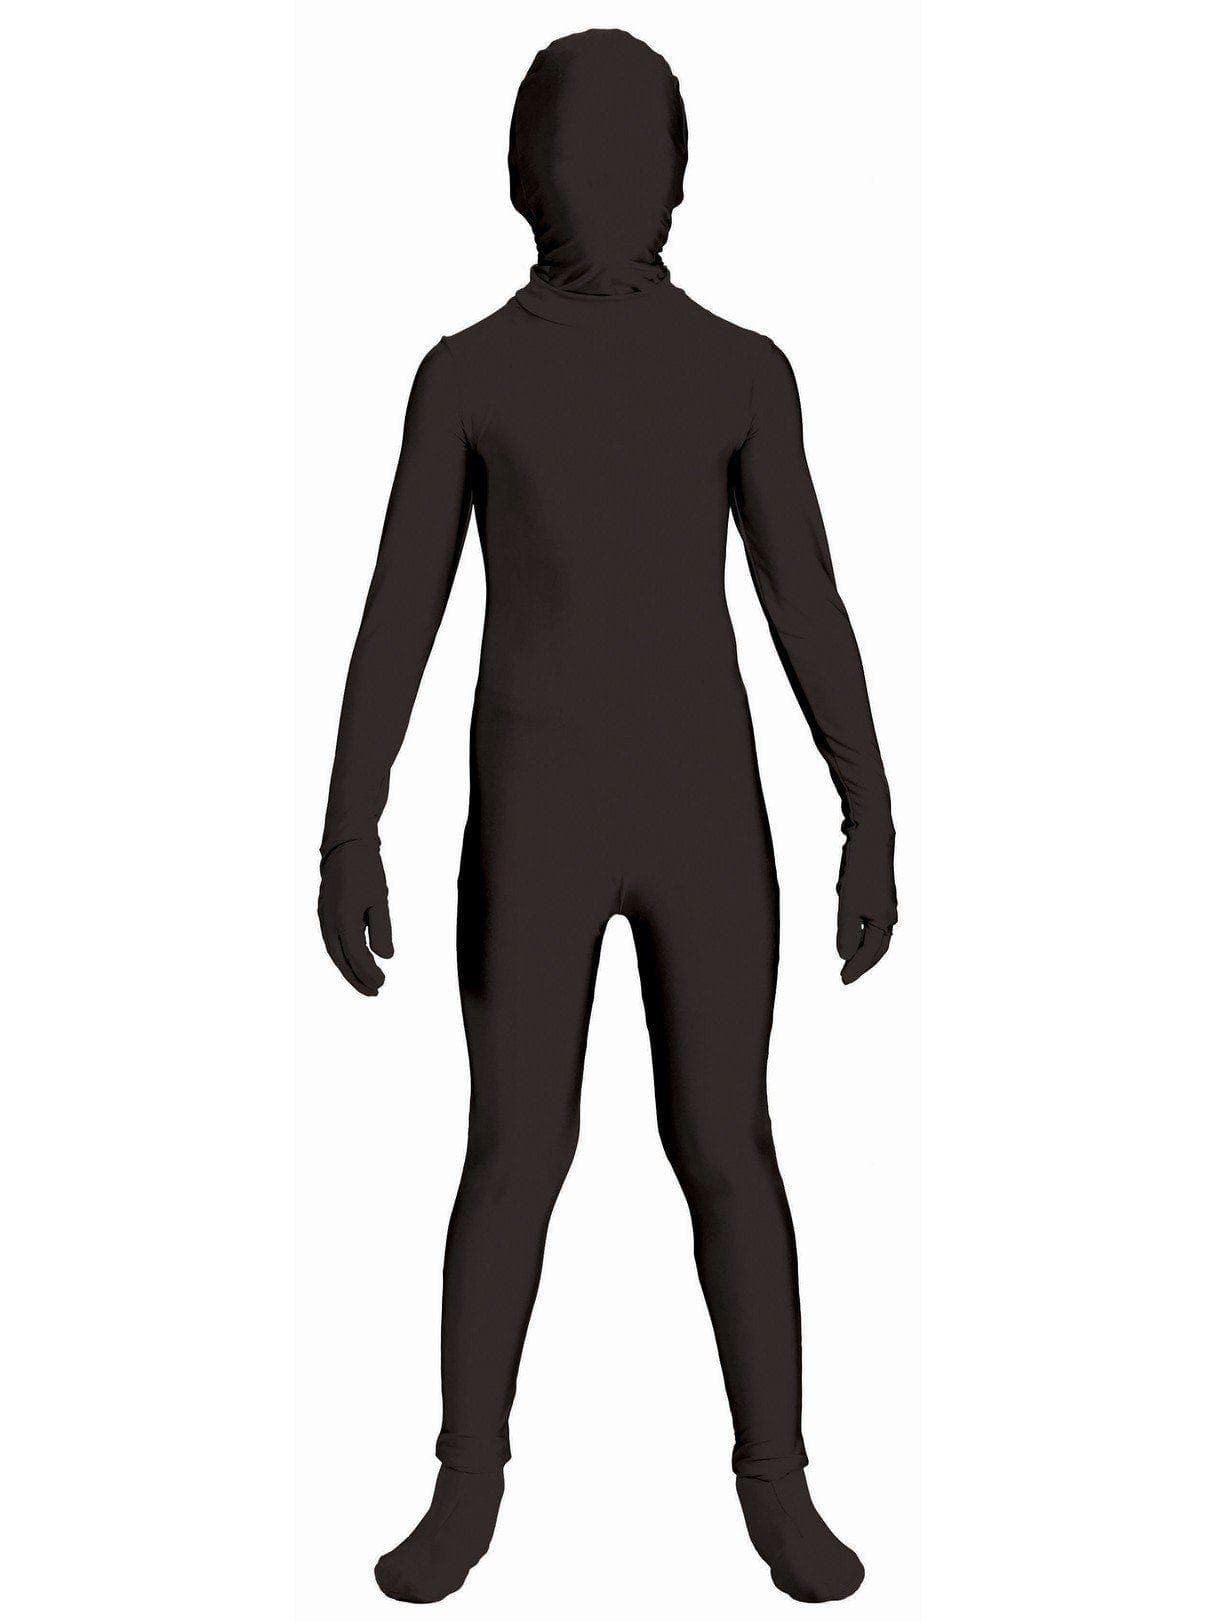 Adult Disappearing Man Black Costume - costumes.com